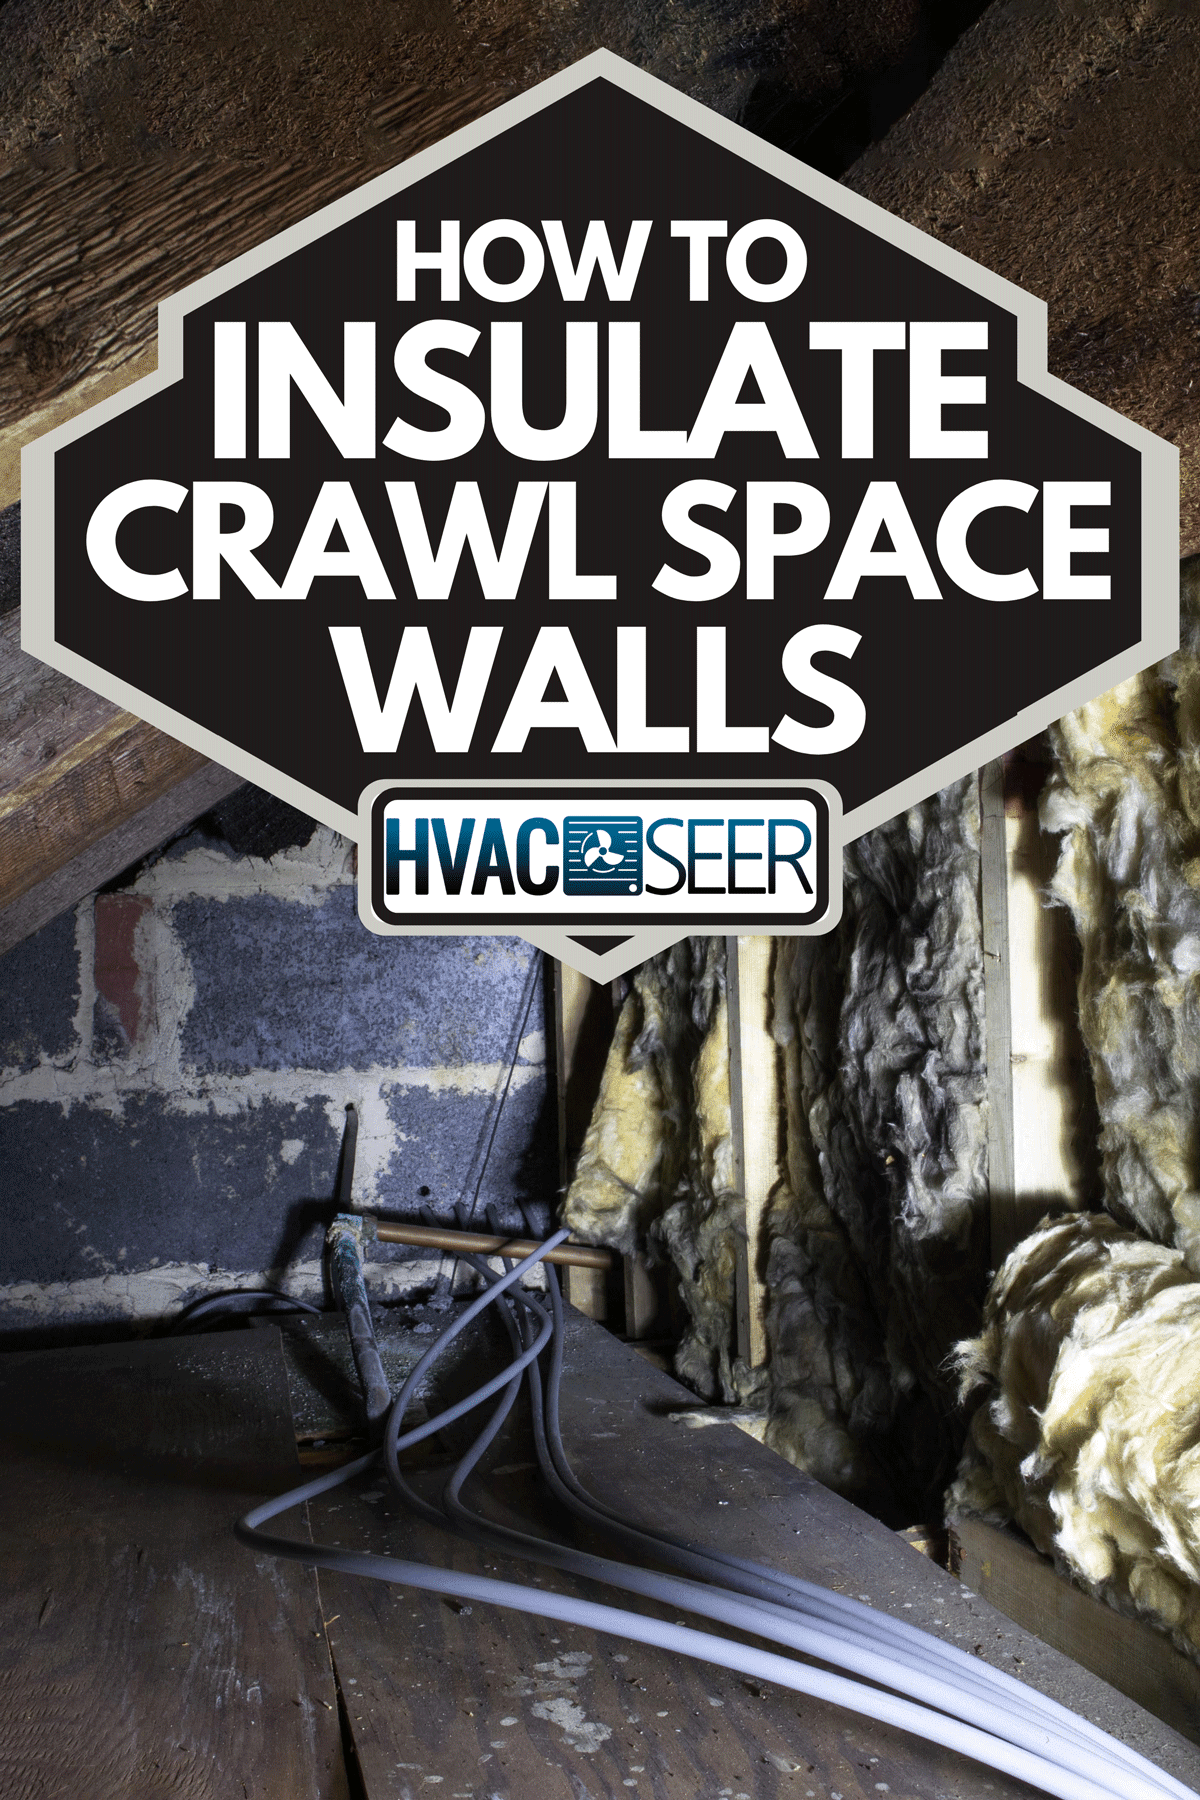 A crawl space under the eves of a house showing old fibreglass insulation, How To Insulate Crawl Space Walls